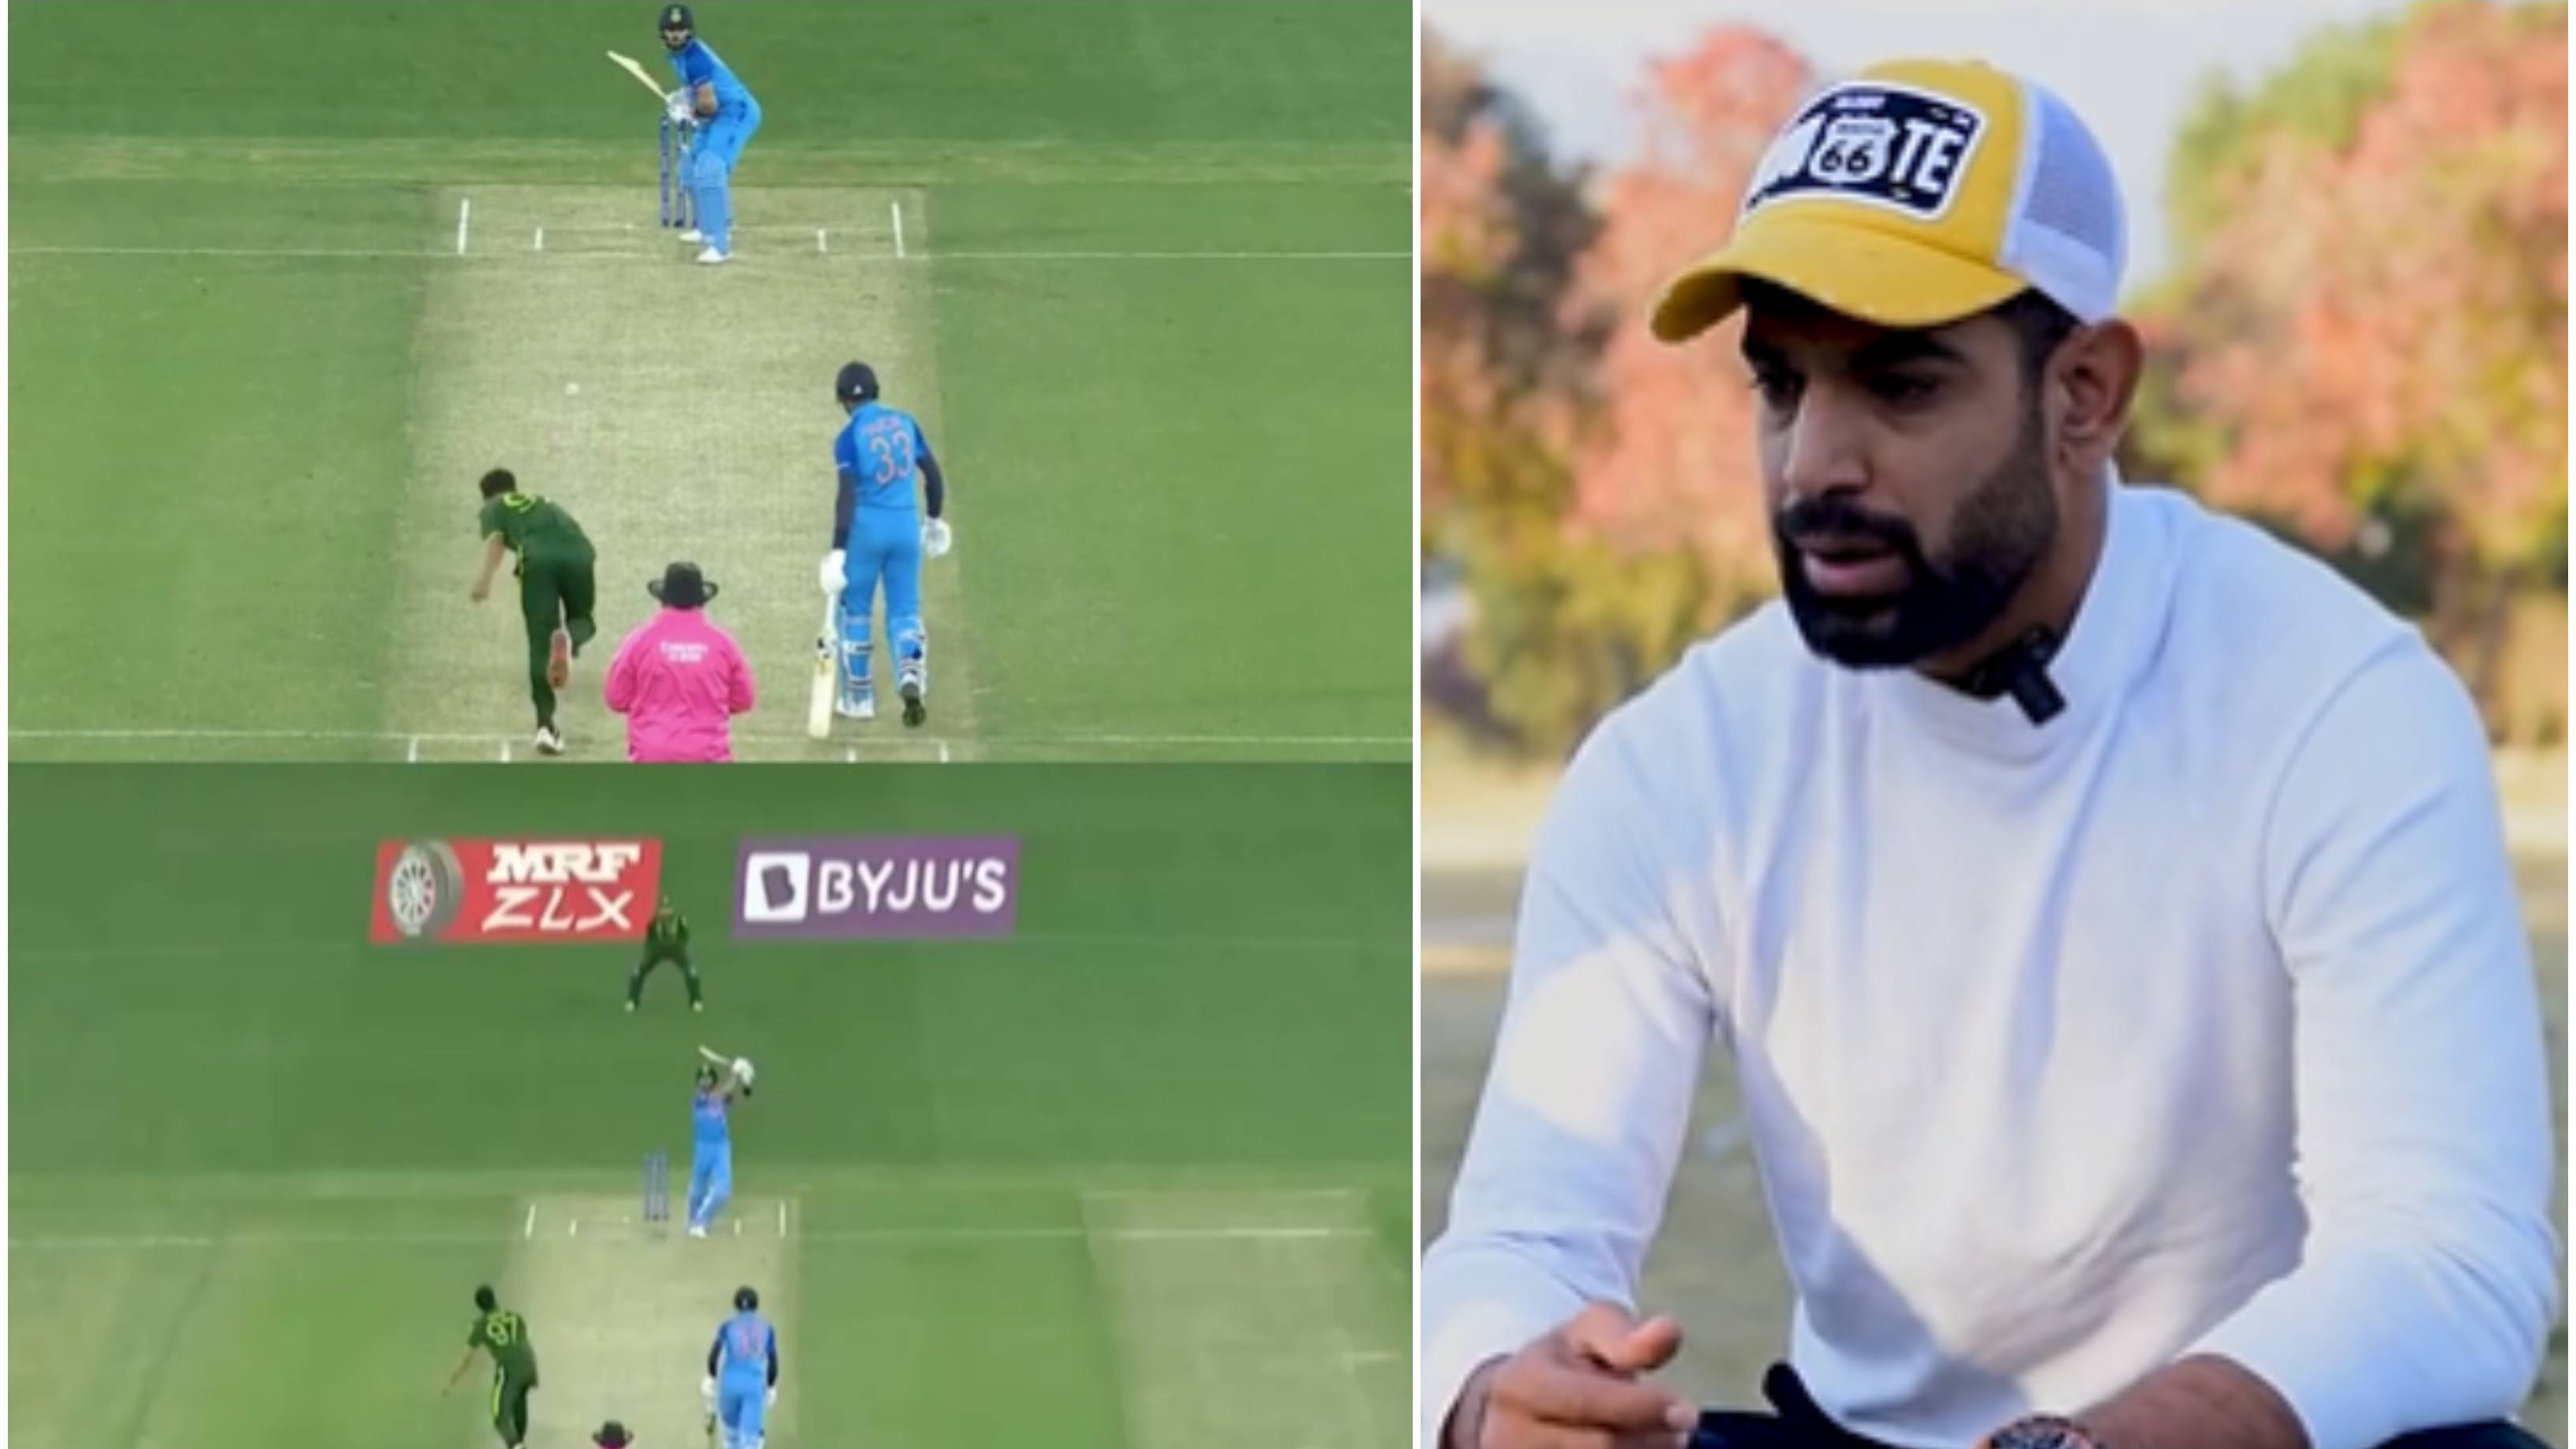 WATCH: “Don’t think any other player can hit a shot like that,” Haris Rauf hails Virat Kohli for his sixes at MCG